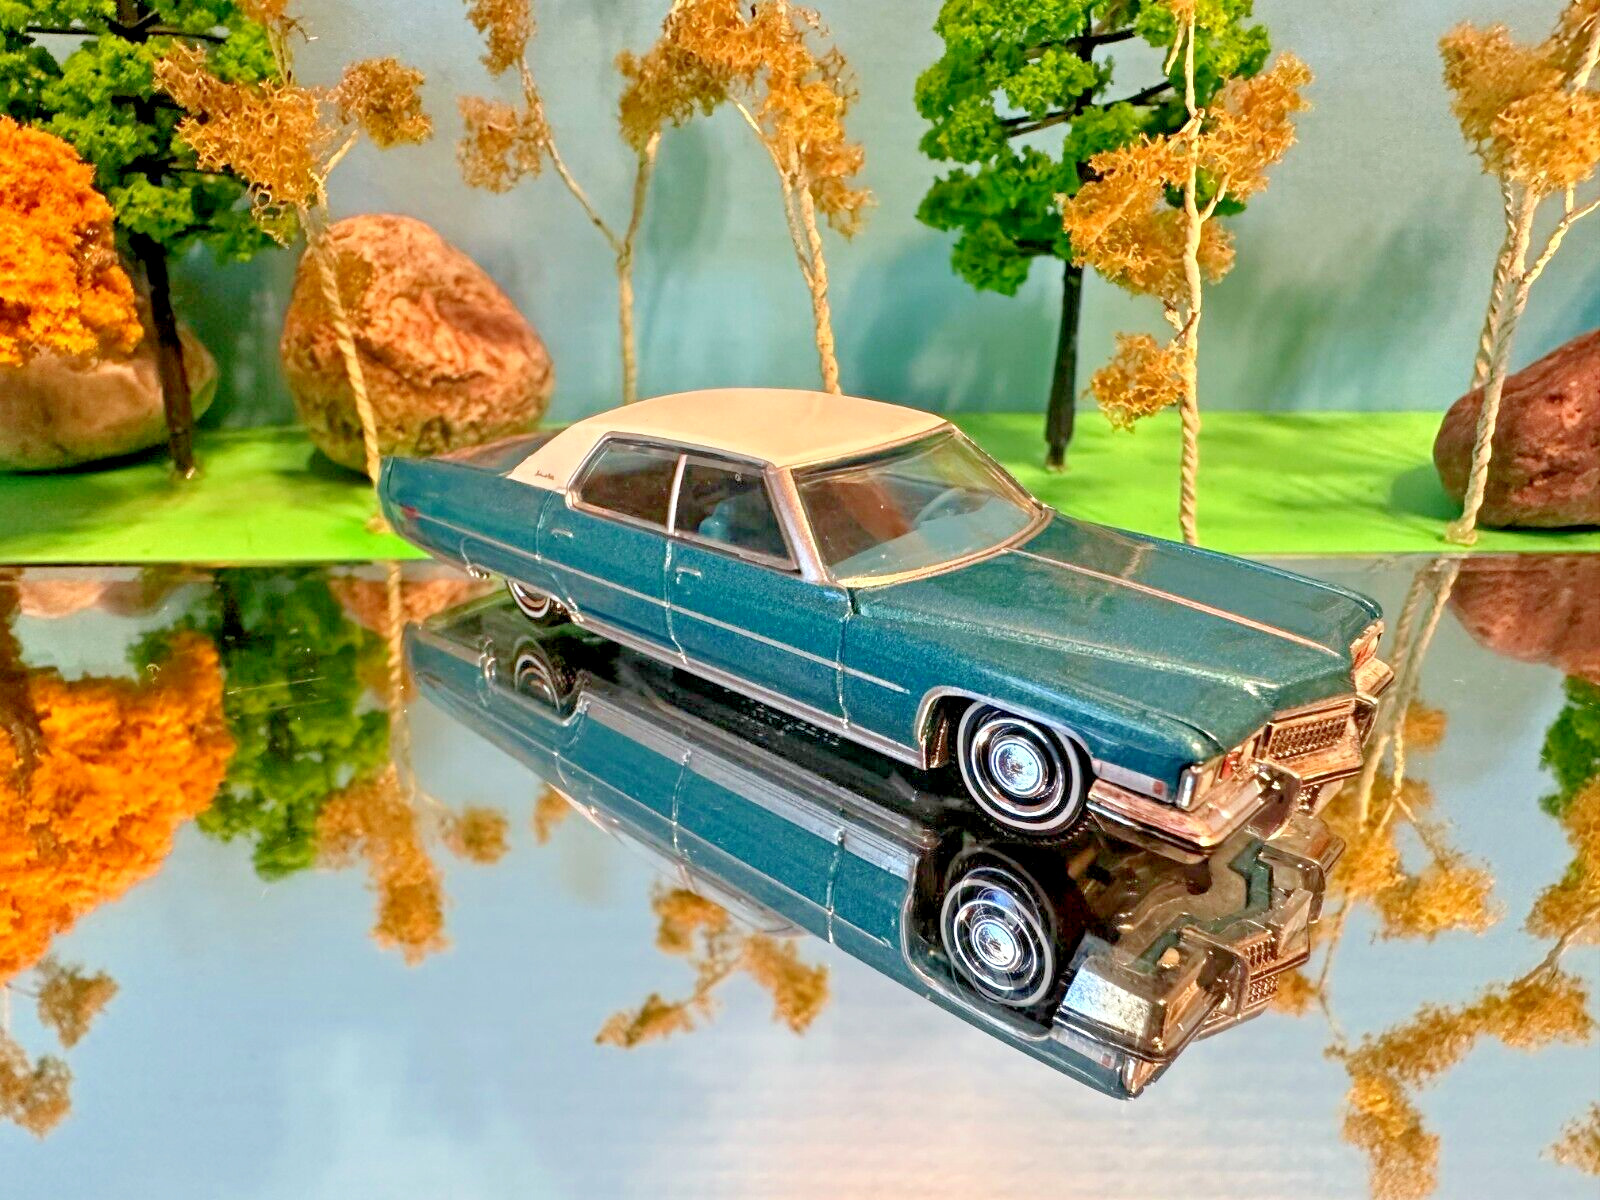 1973 Cadillac Sedan Deville, Turquois, White Roof, Greenlight Collectibles, 1:64